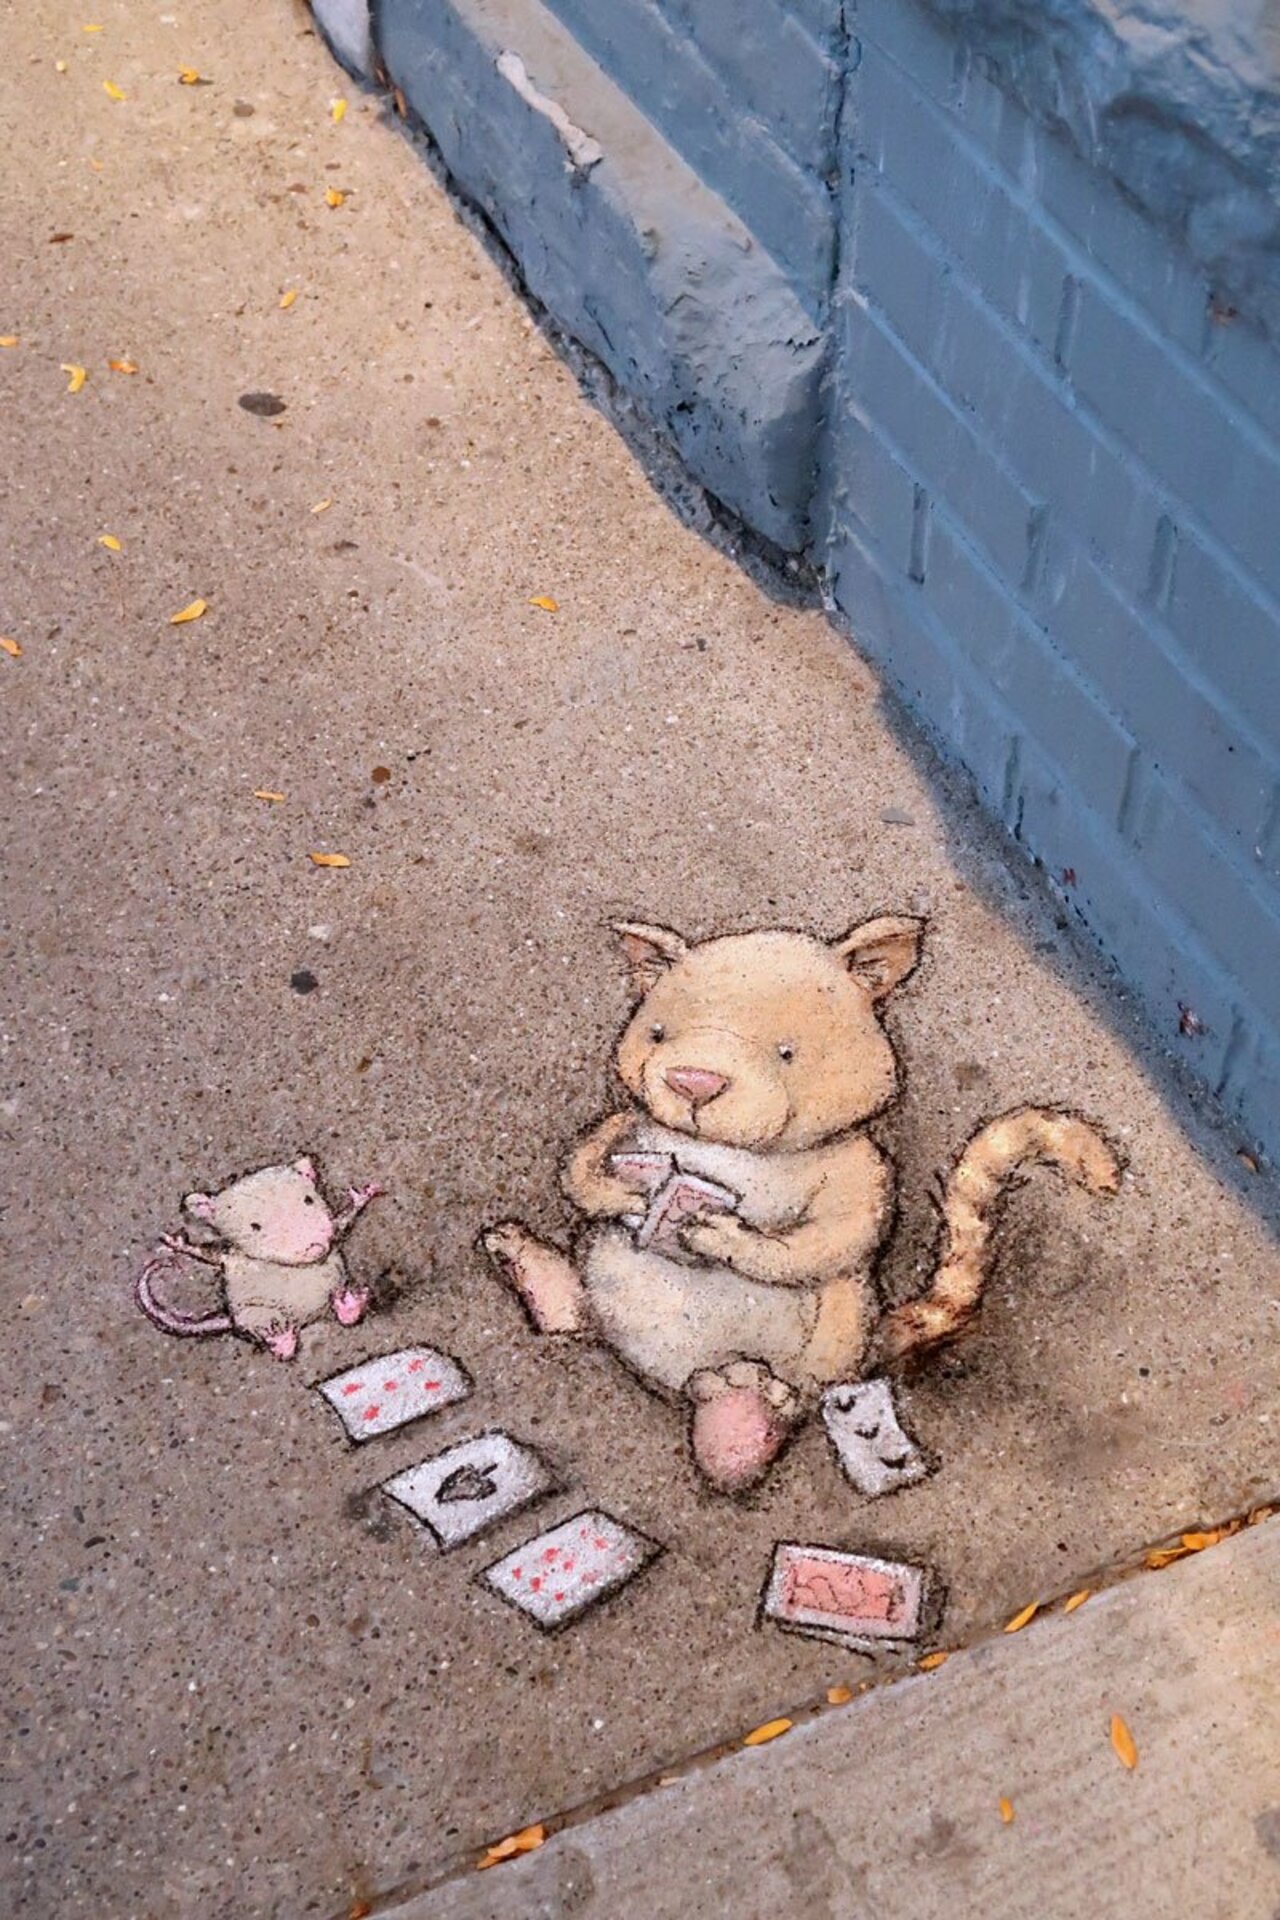 Enid and Logan have their own interpretation of “a game of cat and mouse.” #streetart #sidewalkchalk #norules https://t.co/KAJY1BIp97